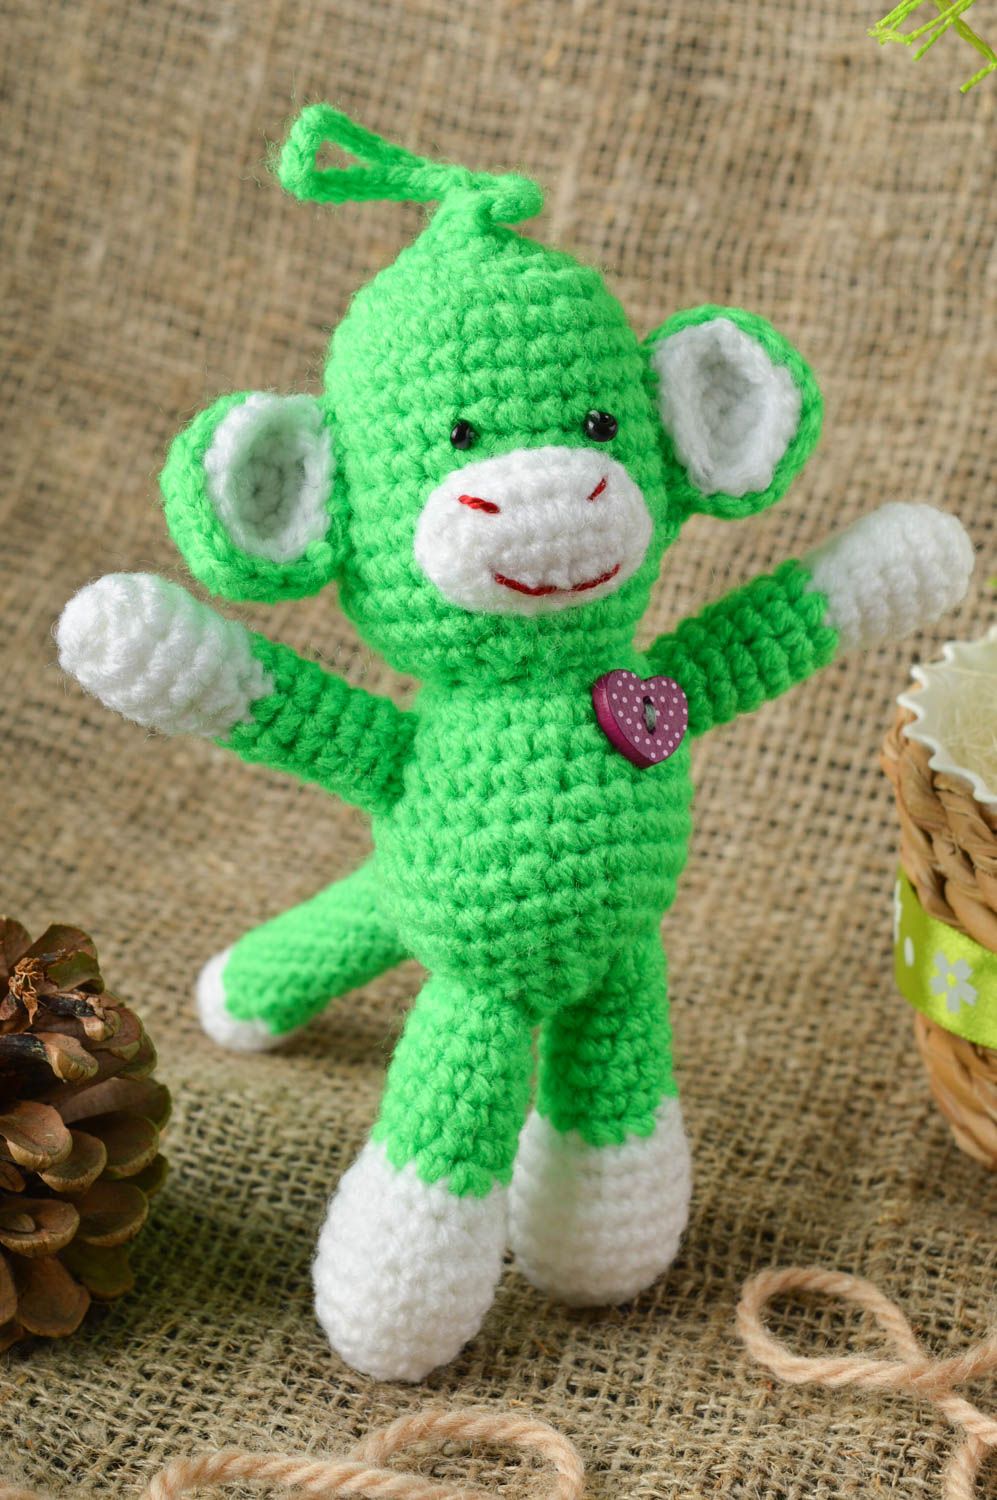 Handmade cute crocheted toy interior decor hand-crocheted toy for children photo 1